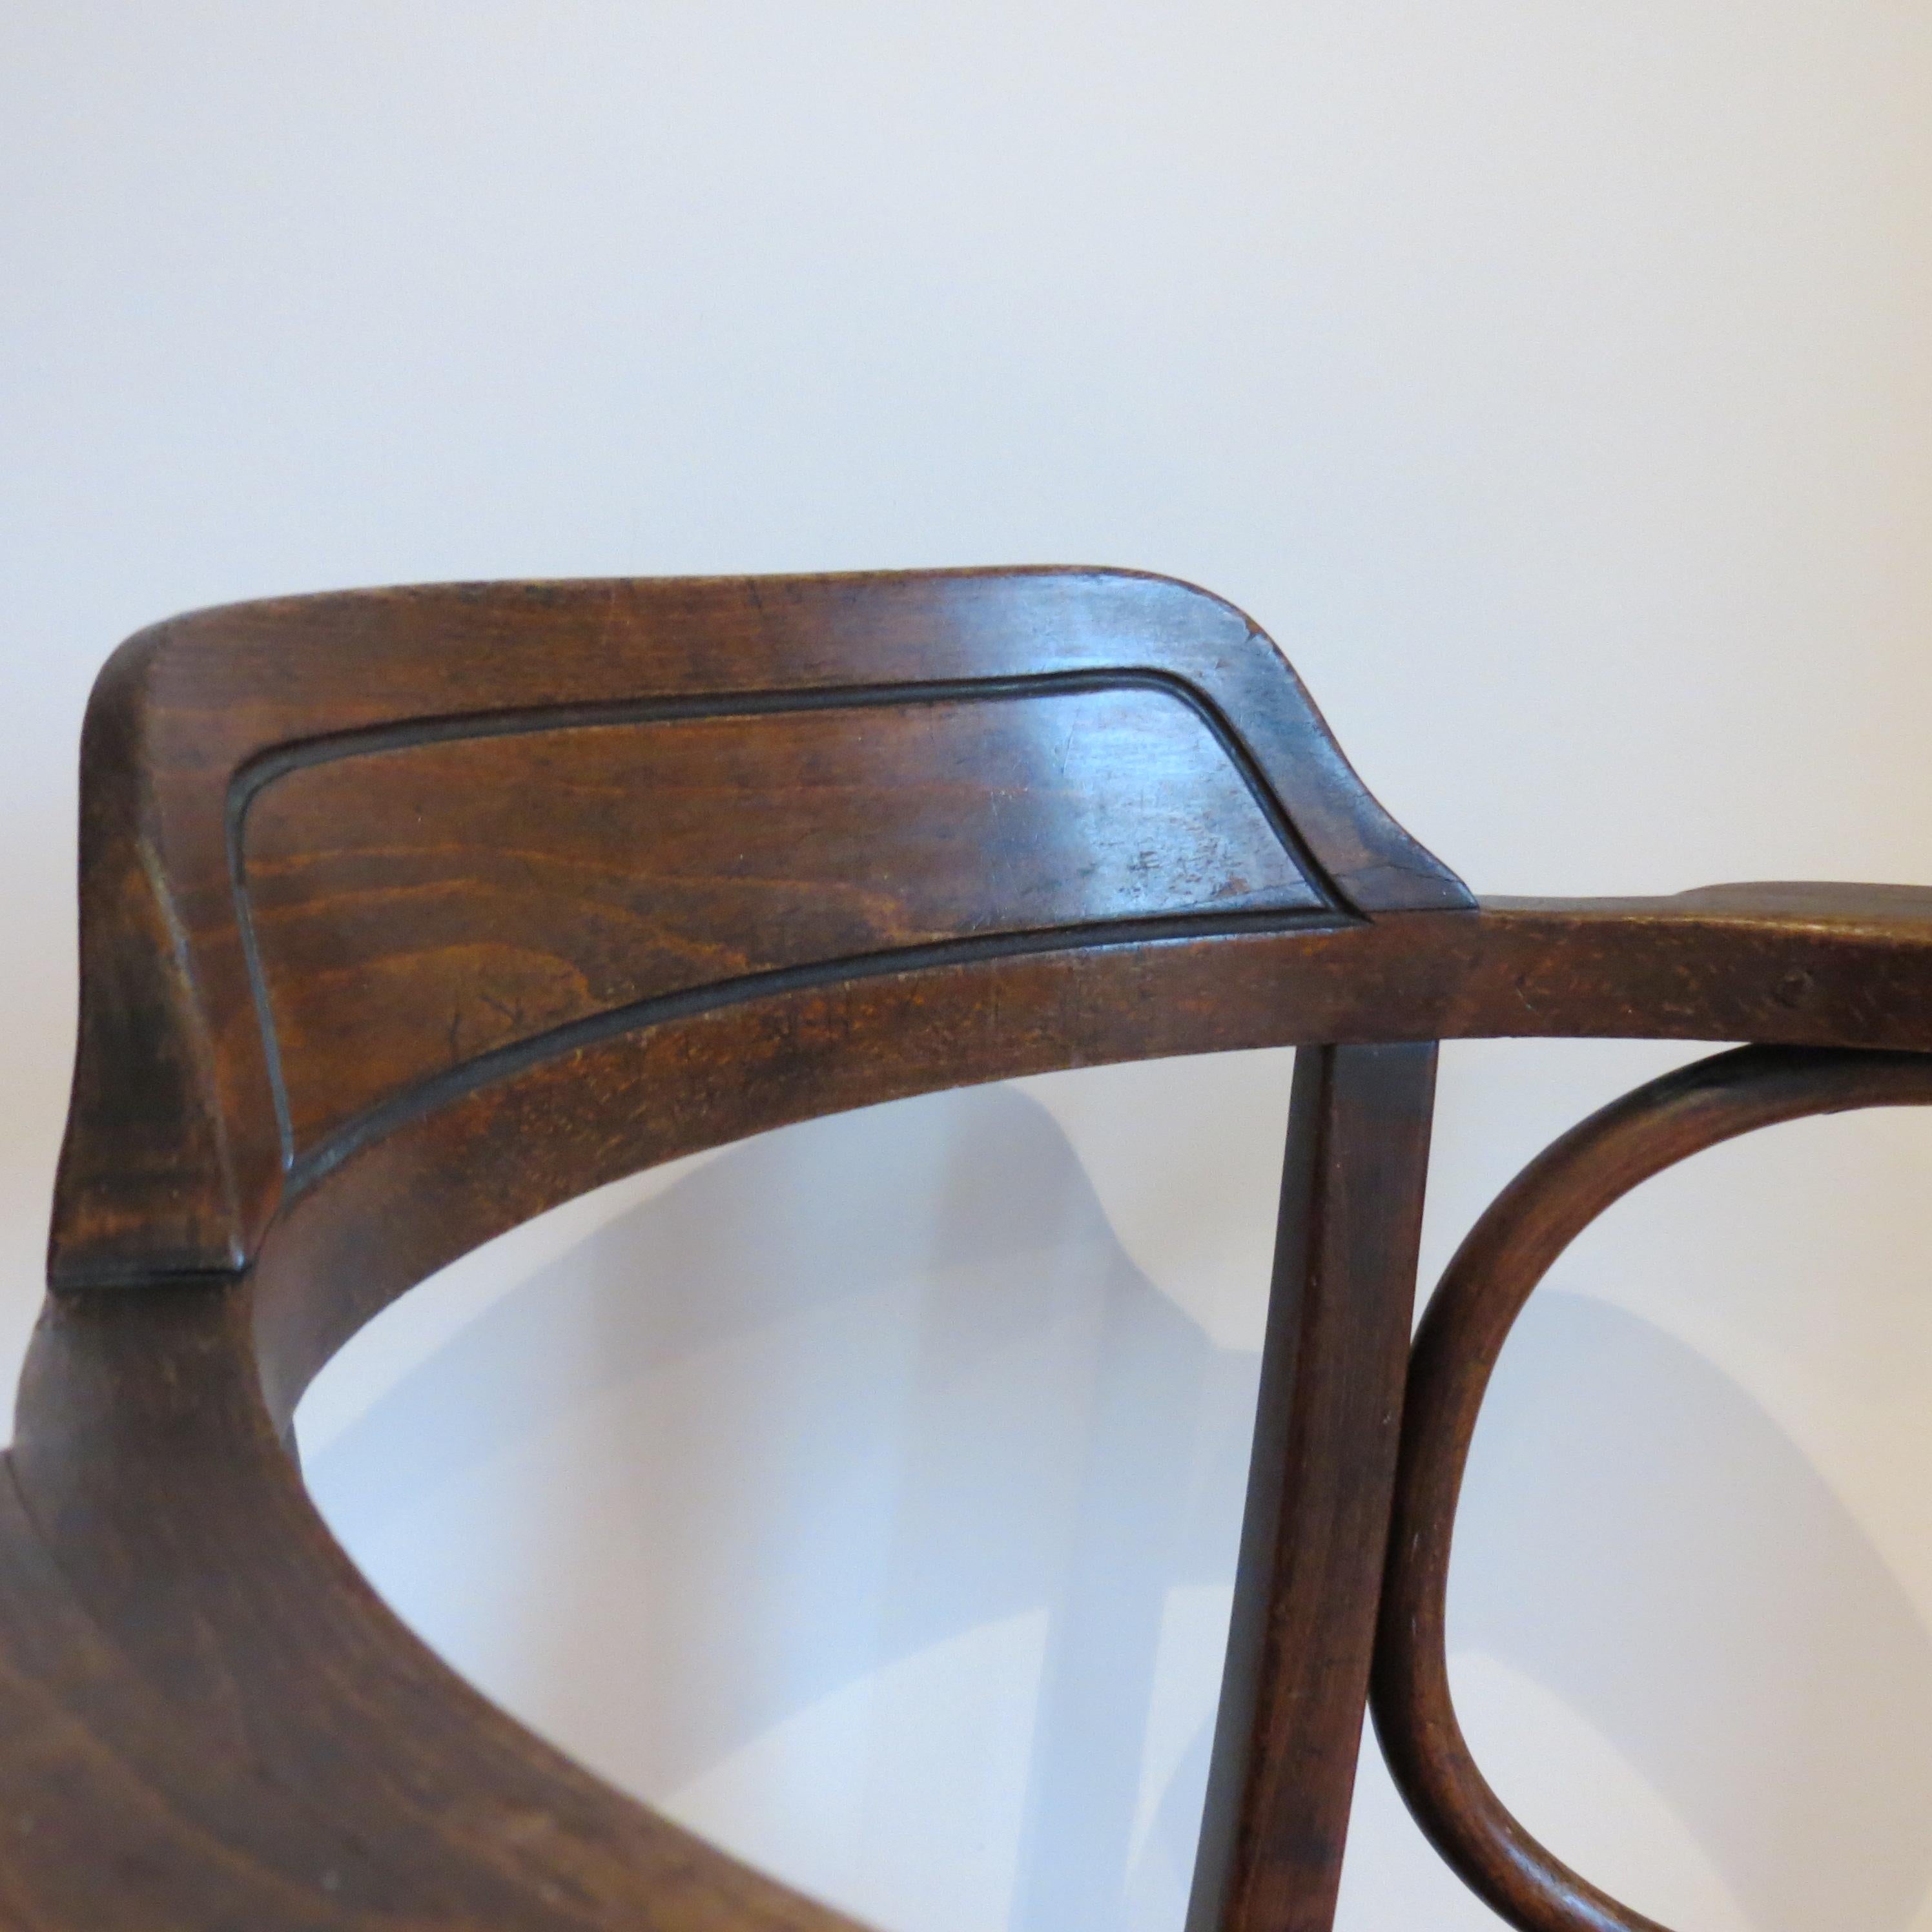 Wonderful bentwood chair, designed by Jacob and Joseph Kohn, Austria and produced by Thonet, dates from the early 1900s.  Model Number 704
Retains the original embossed seat with wonderful shell design.  
Oak back and arms, steamed bentwood